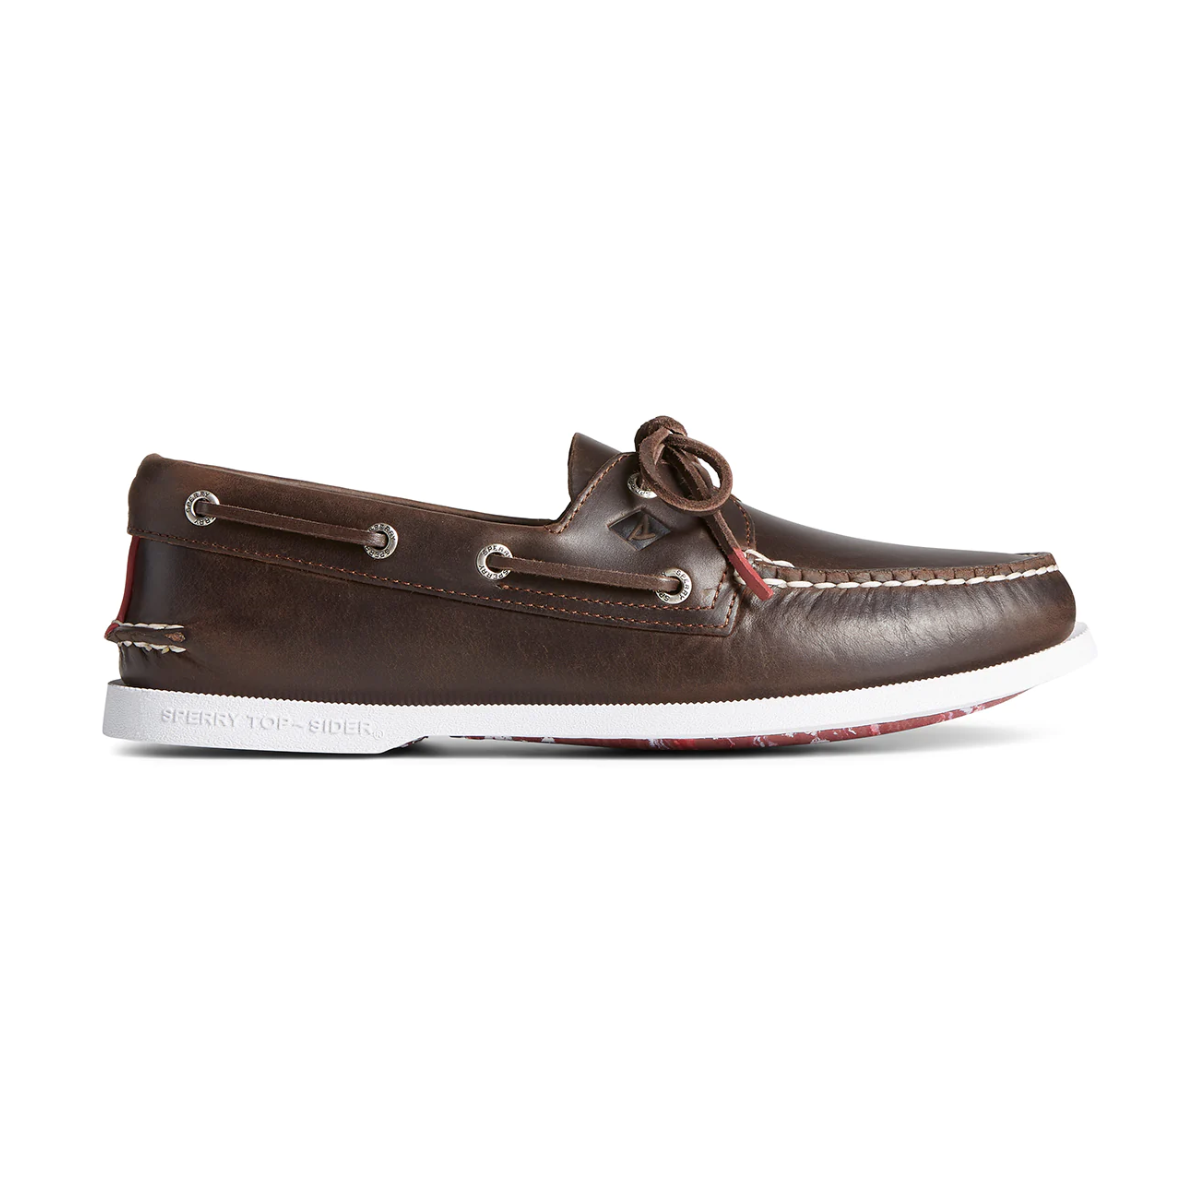 Sperry Authentic Original 2-Eye Boat Shoe